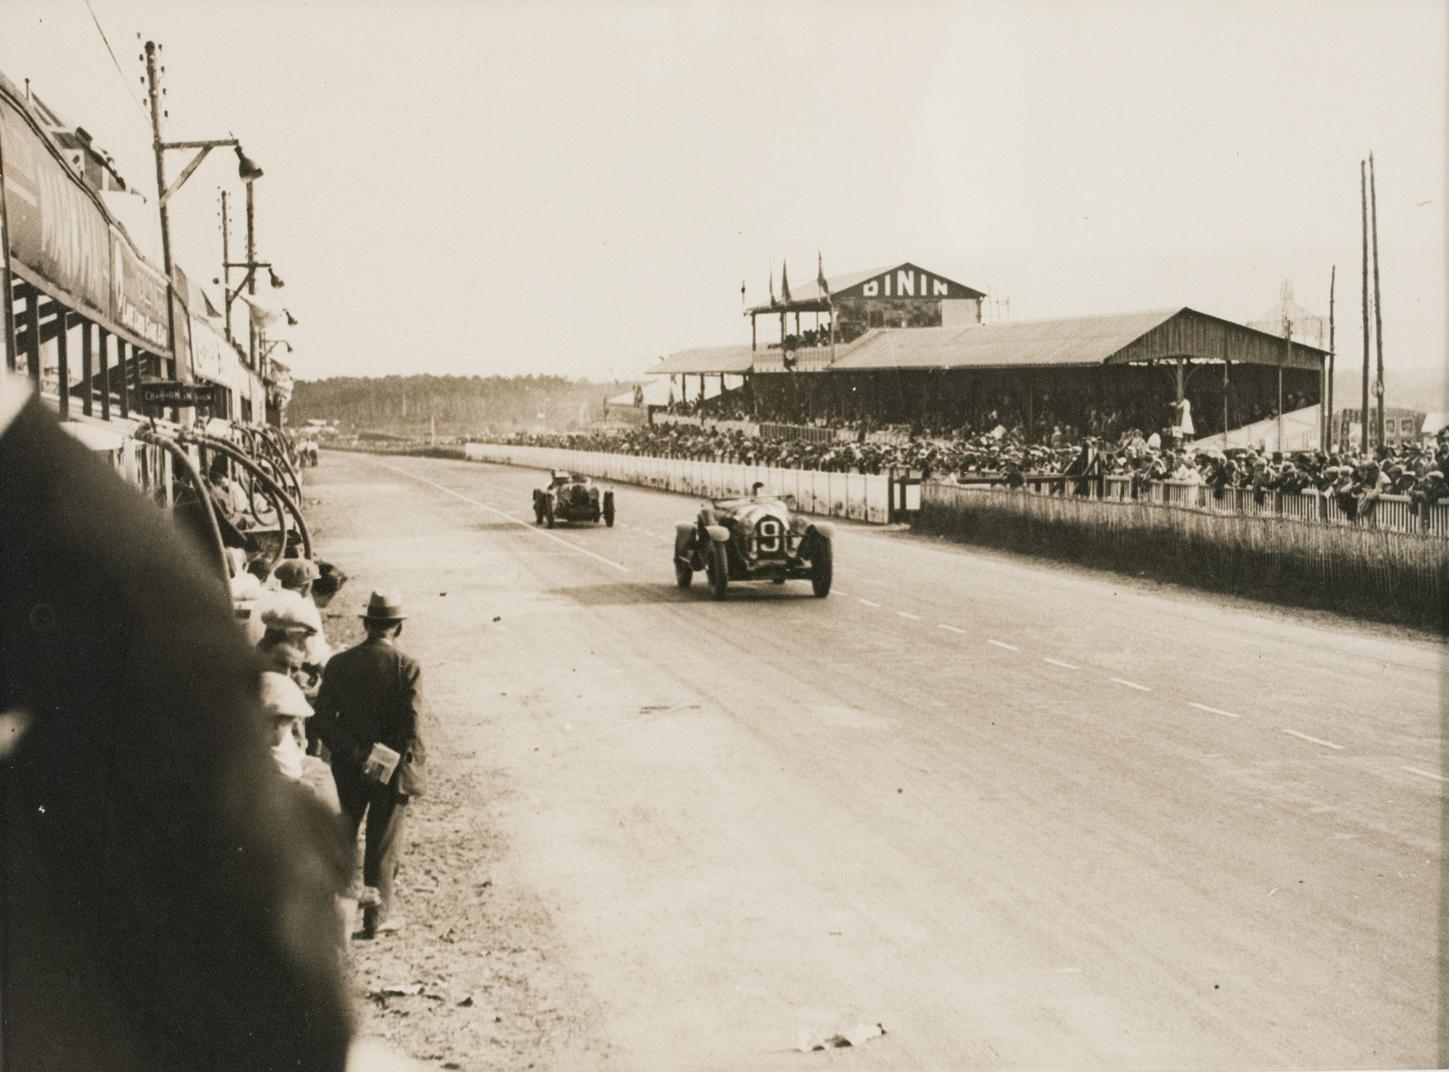 Wide World Photos Figurative Photograph - 1920s Car Race in France - Silver Gelatin Black and White Photography Framed